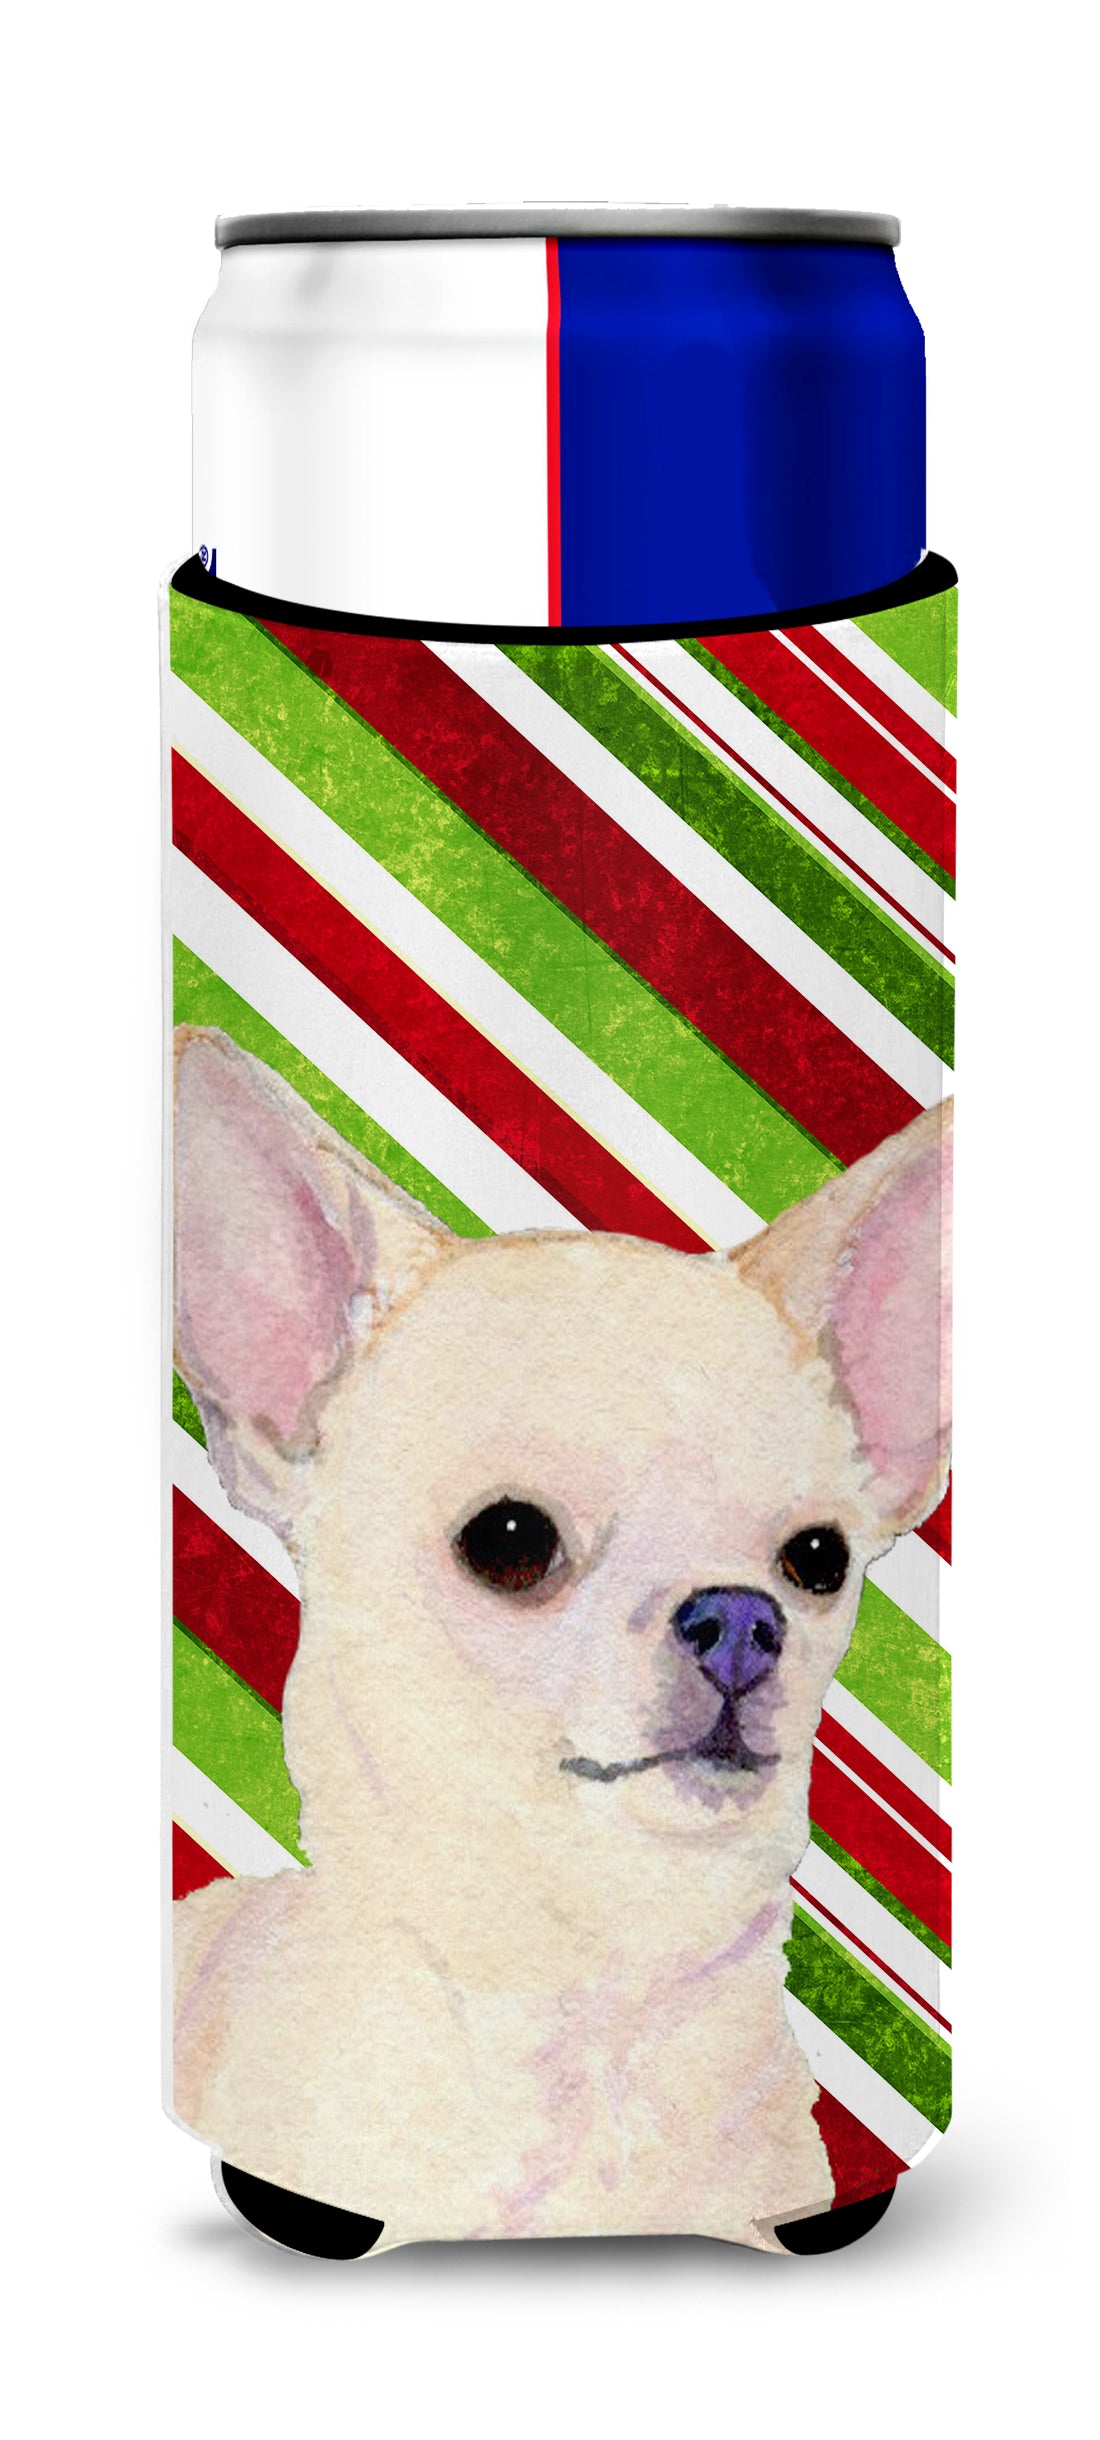 Chihuahua Candy Cane Holiday Christmas Ultra Beverage Insulators for slim cans SS4541MUK.